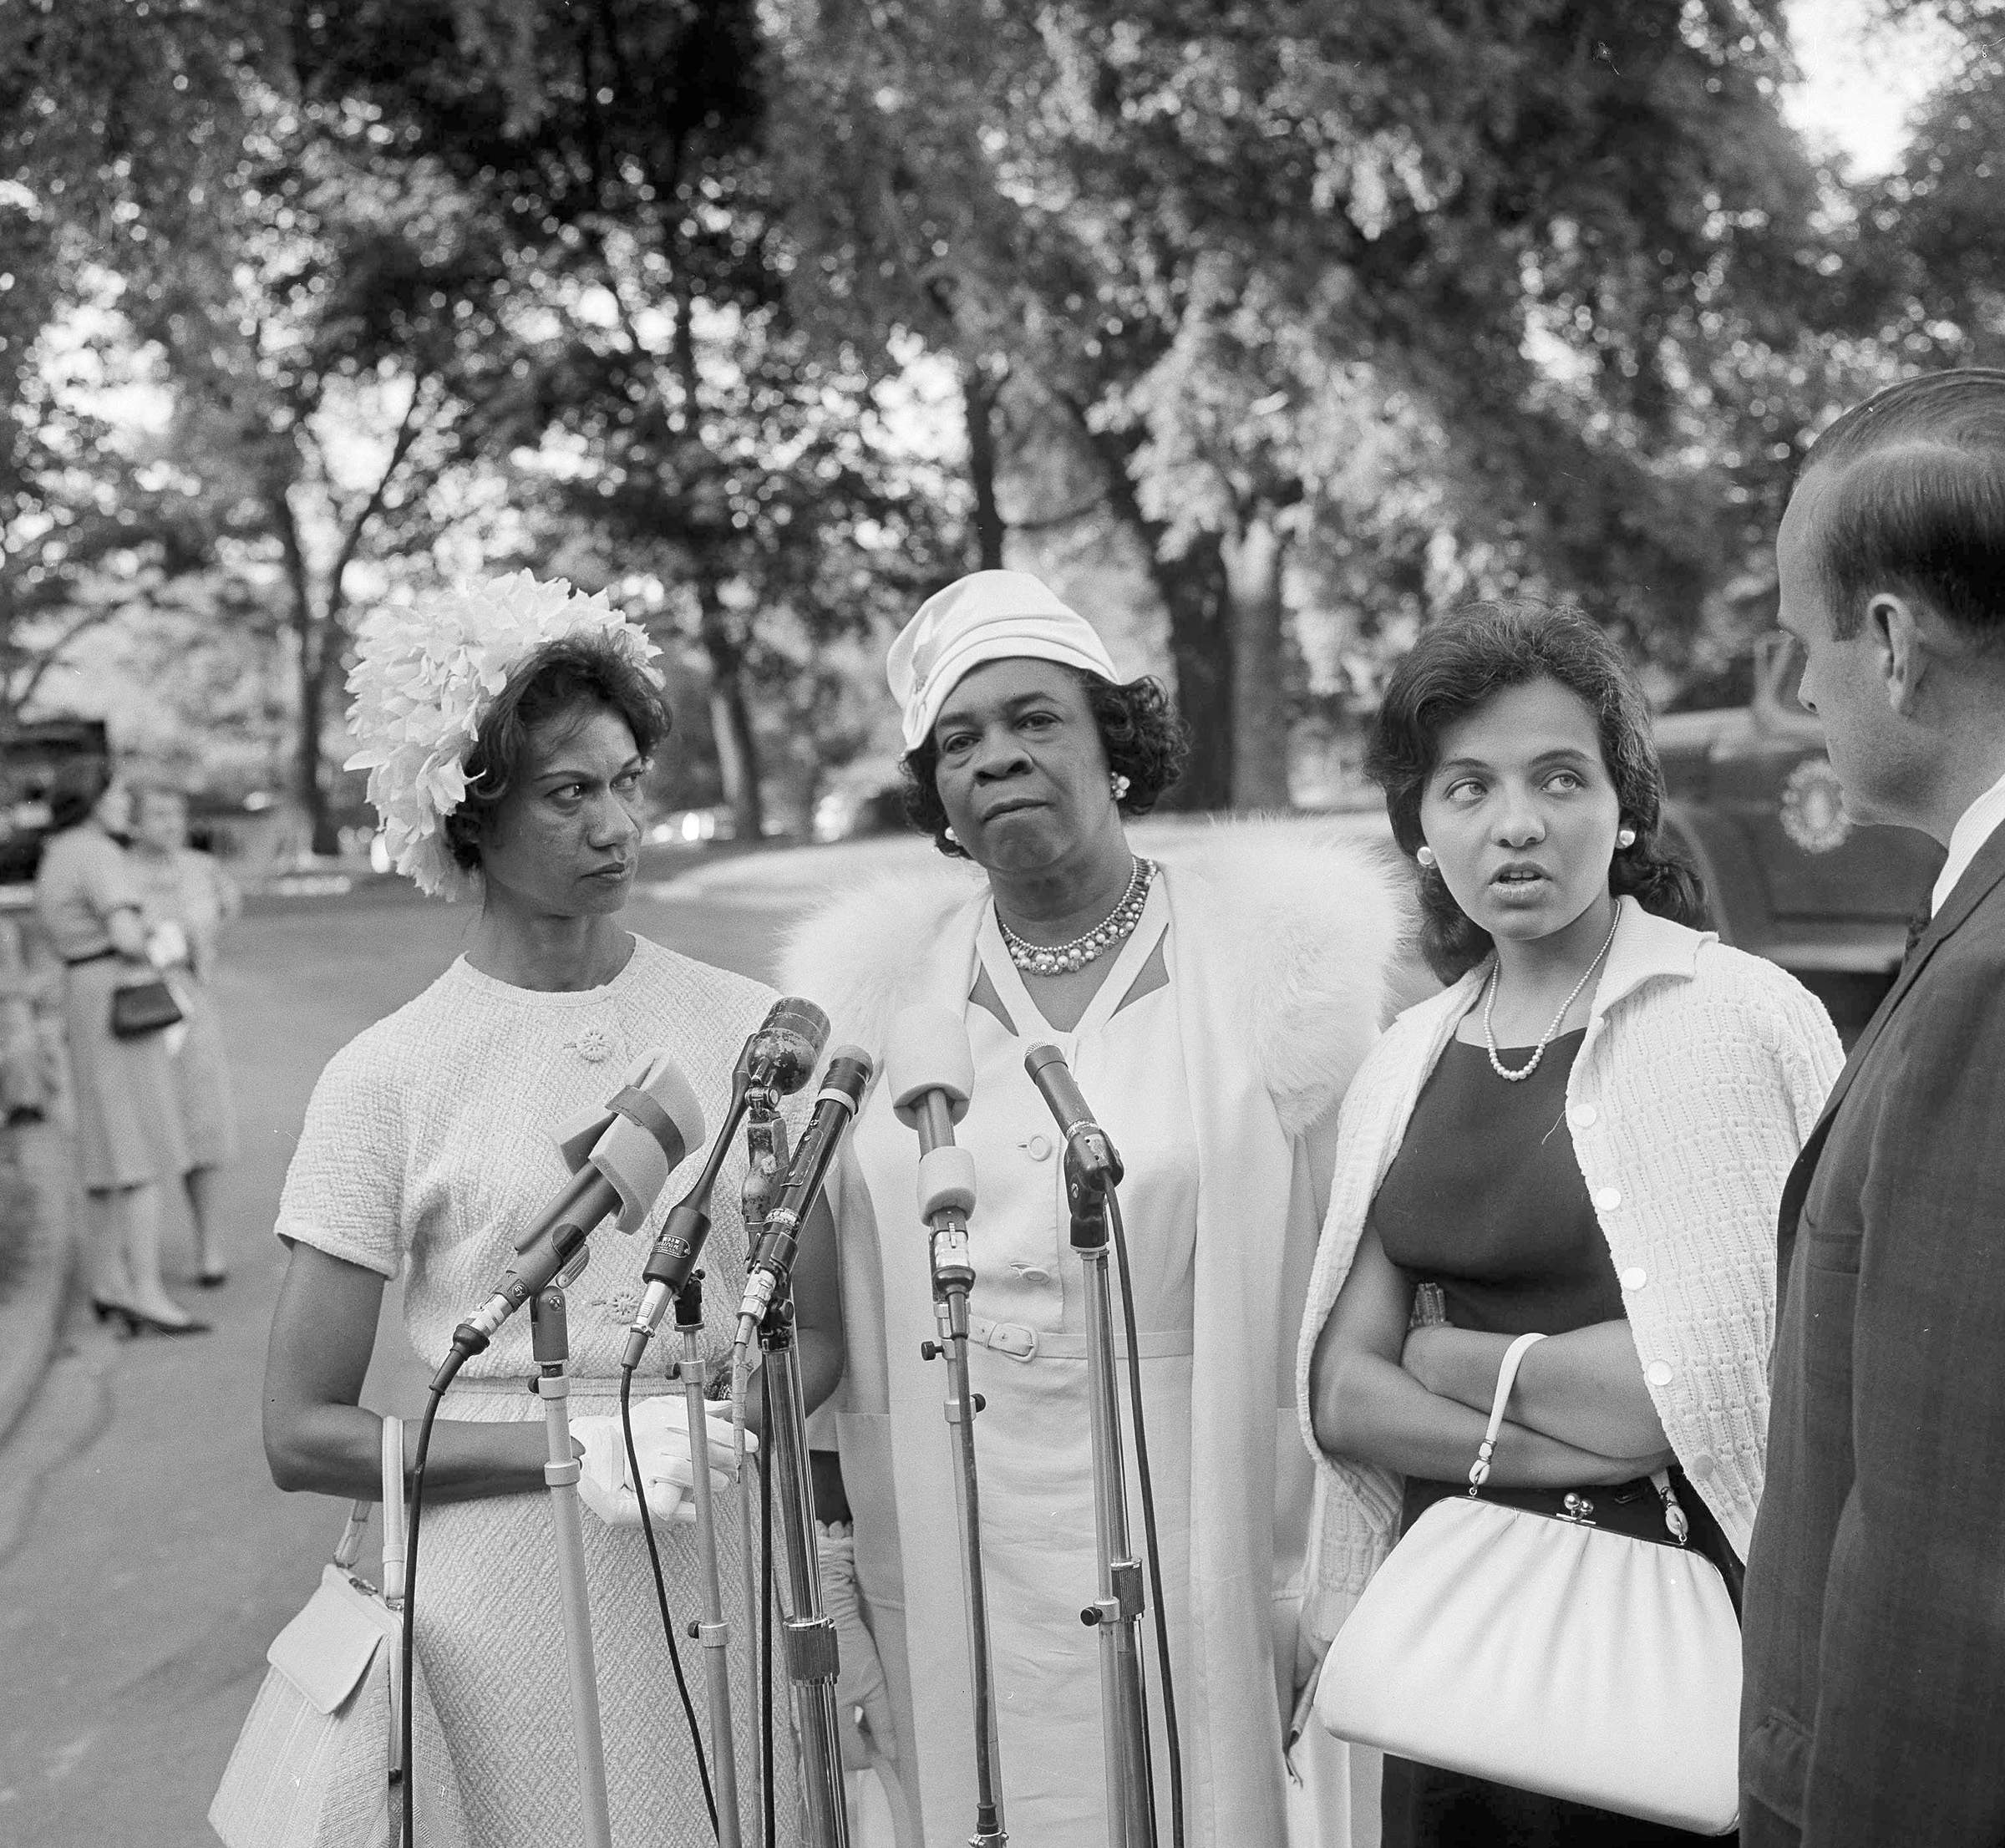 Gloria Richardson, left, a leader in the Cambridge, Md., integrationist's movement, Dr. Rosa L. Gragg of the National Association of Colored Woman's Clubs and Mrs. Diane Nash Bevel, right, representing the Southern Christian Leadership Committee, are interviewed as they leave the White House in Washington, D.C., July 9, 1963. (Henry Burroughs—AP)